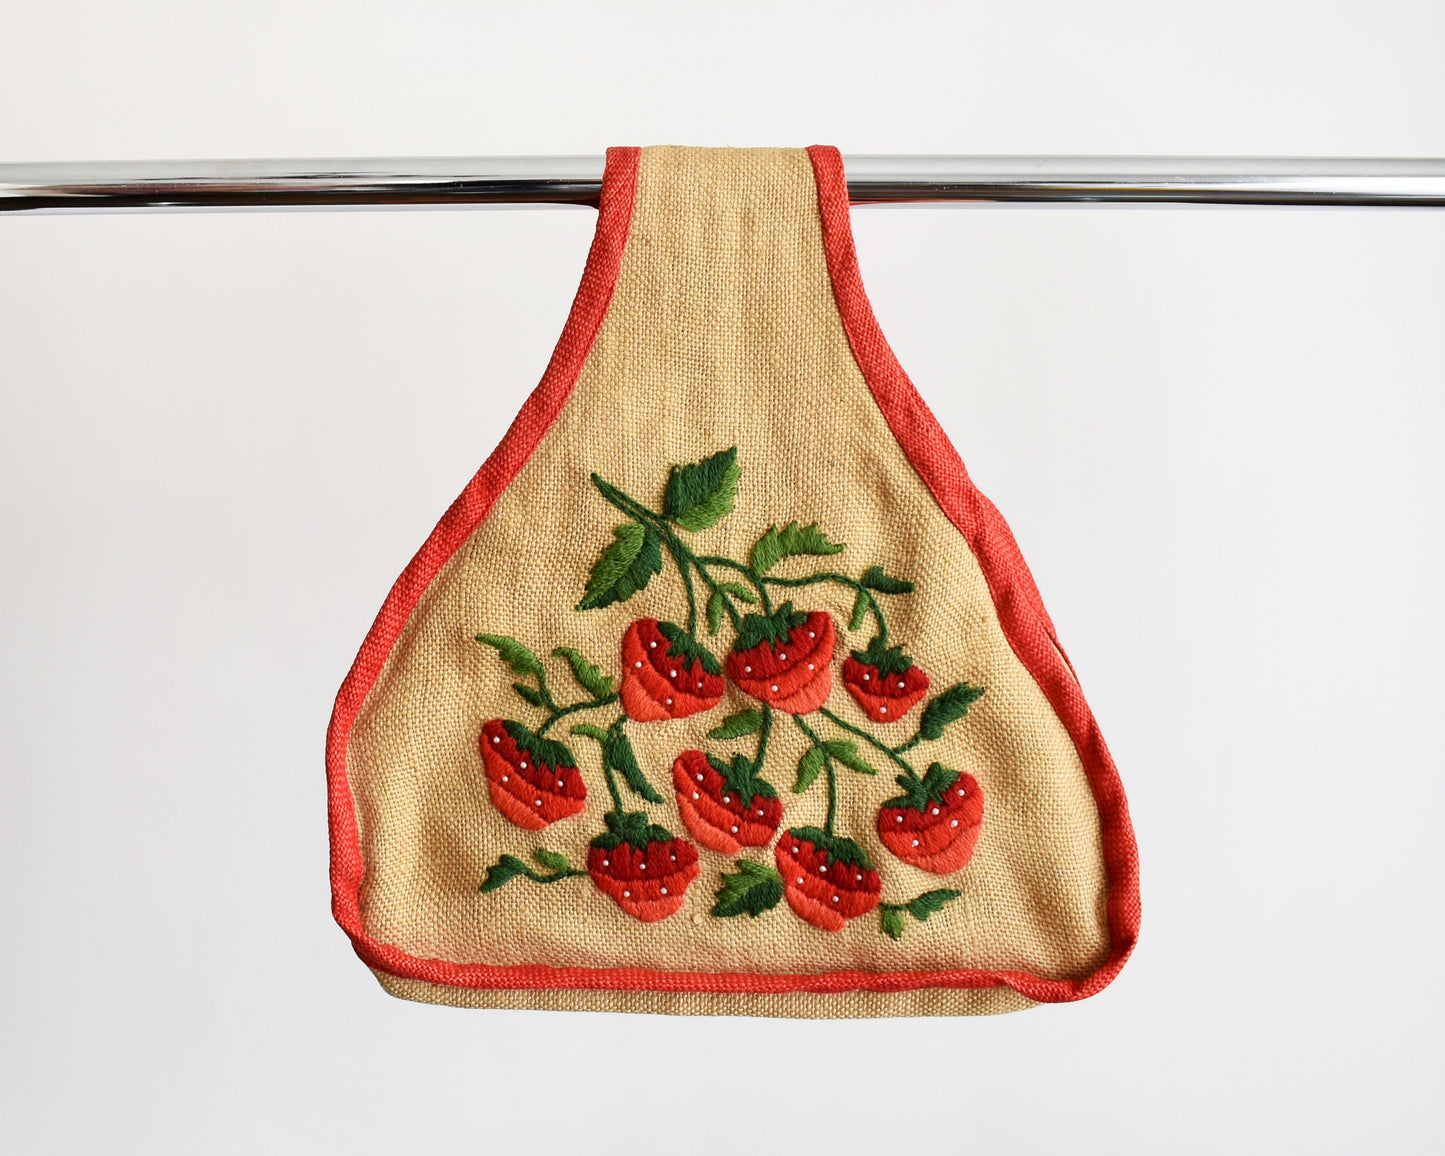 A vintage 60s burlap purse that has  embroidered strawberries on the front, with green leaves and small white pearl beaded seeds and red trim. The purse is being modeled on a pole